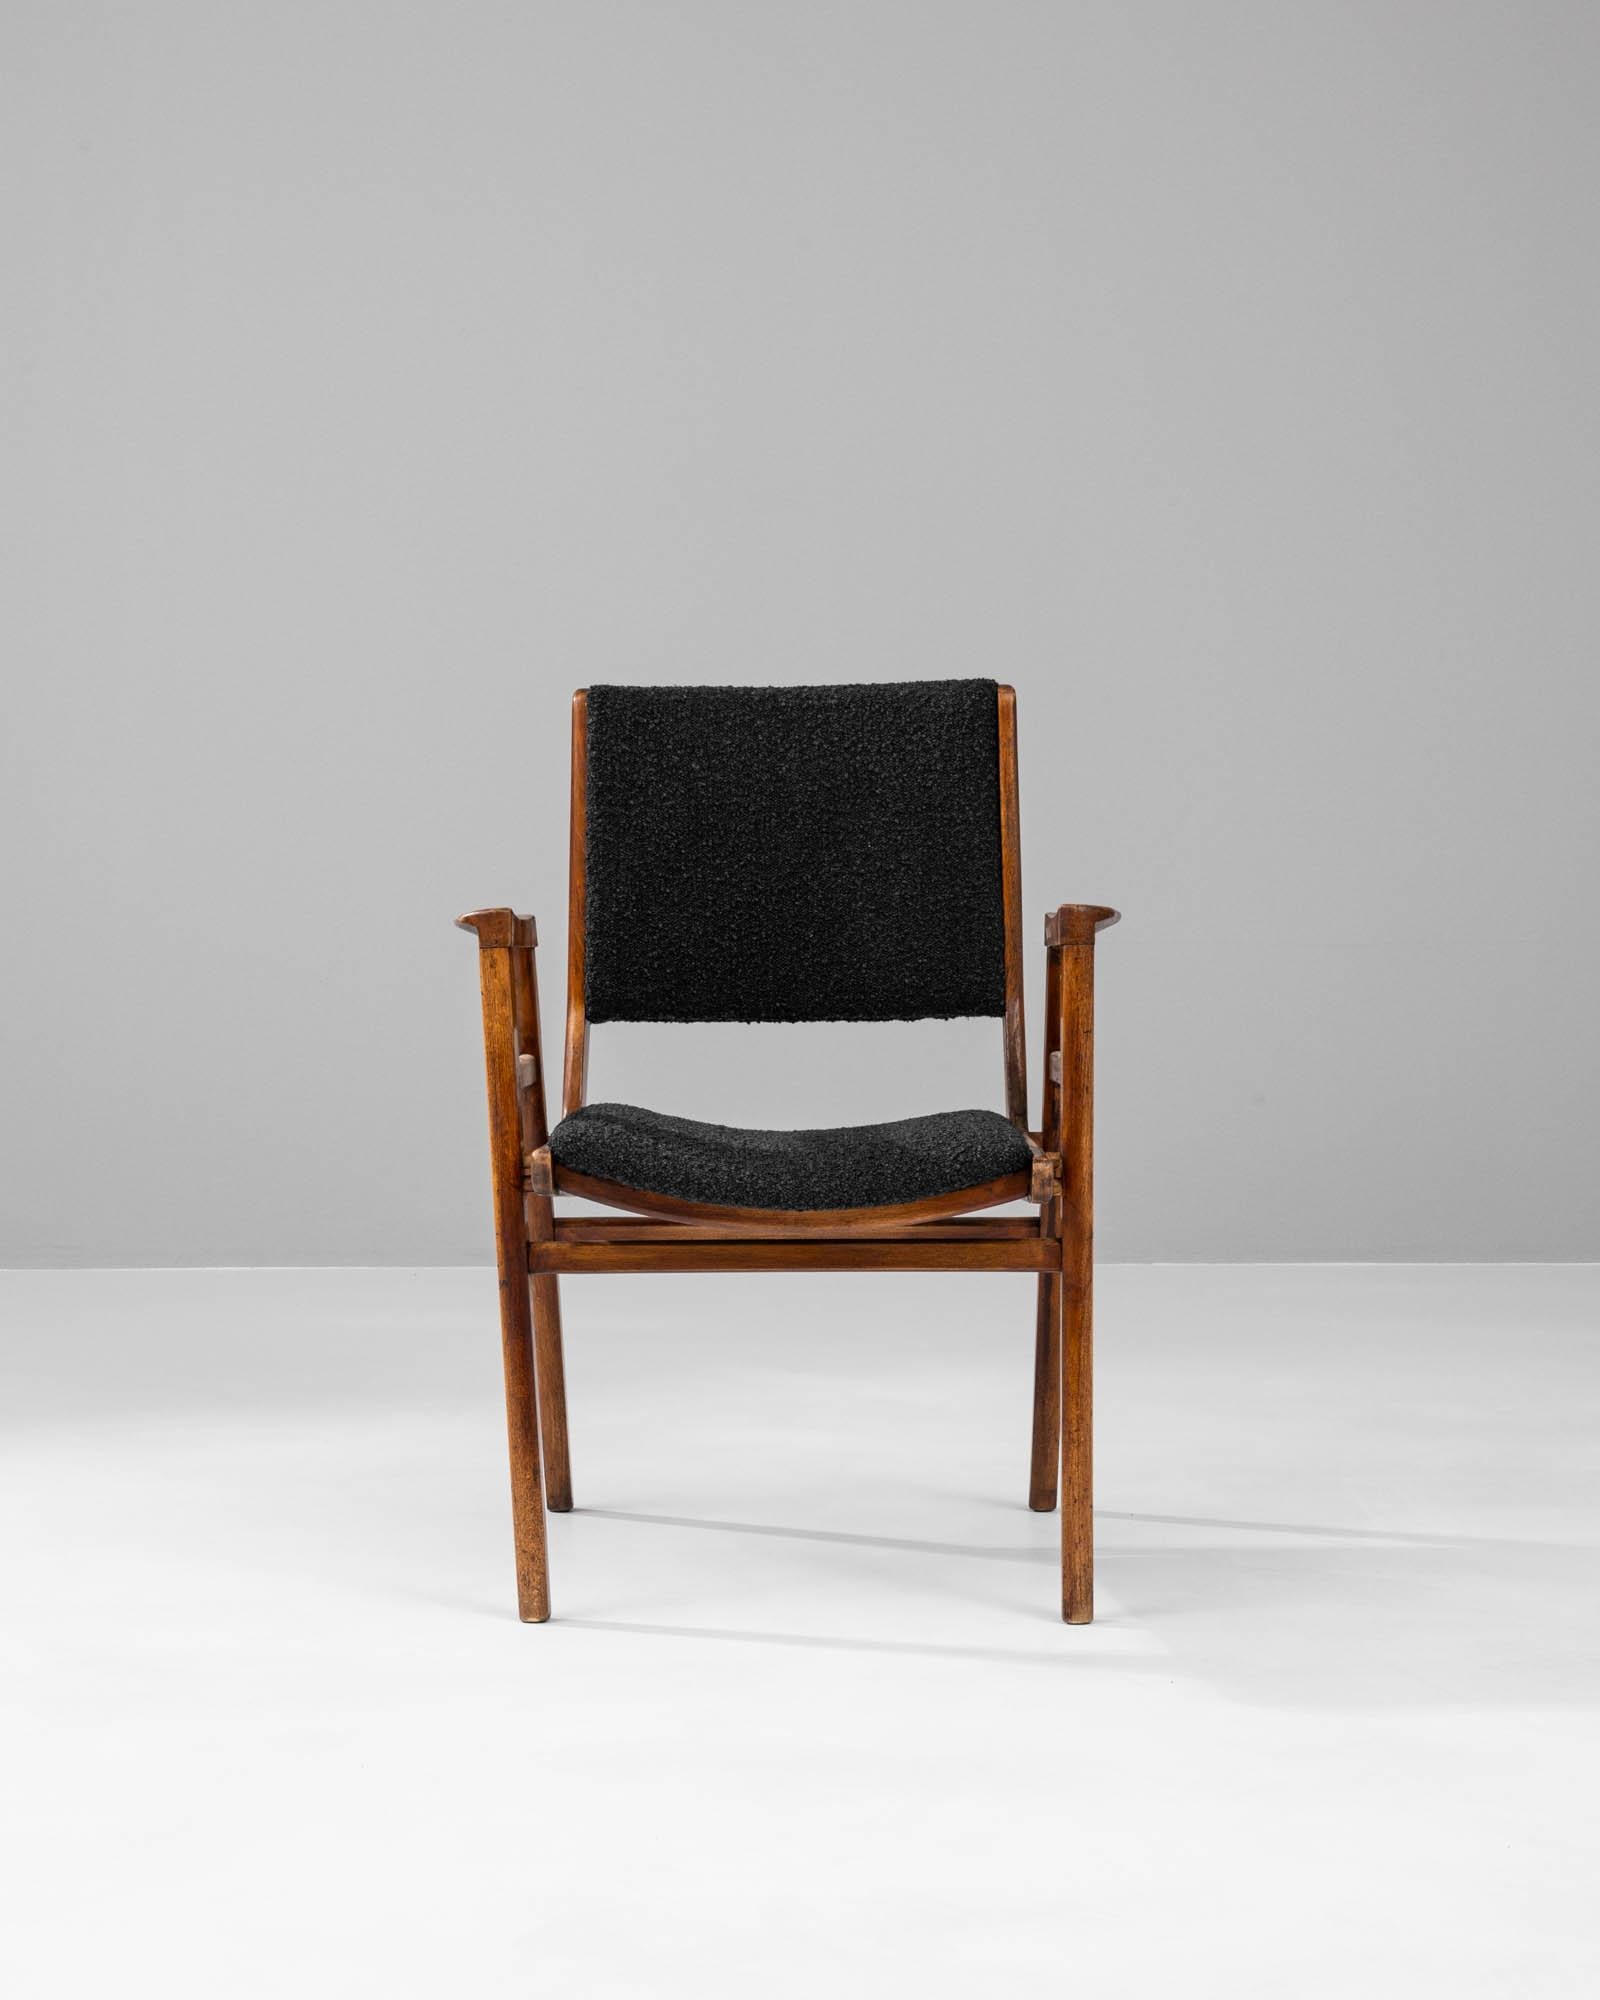 Discover the epitome of mid-century sophistication with this 20th Century French Upholstered Chair, a striking addition to any modern home or office. Crafted with an eye for timeless design, this chair features sleek, angular wooden arms and legs